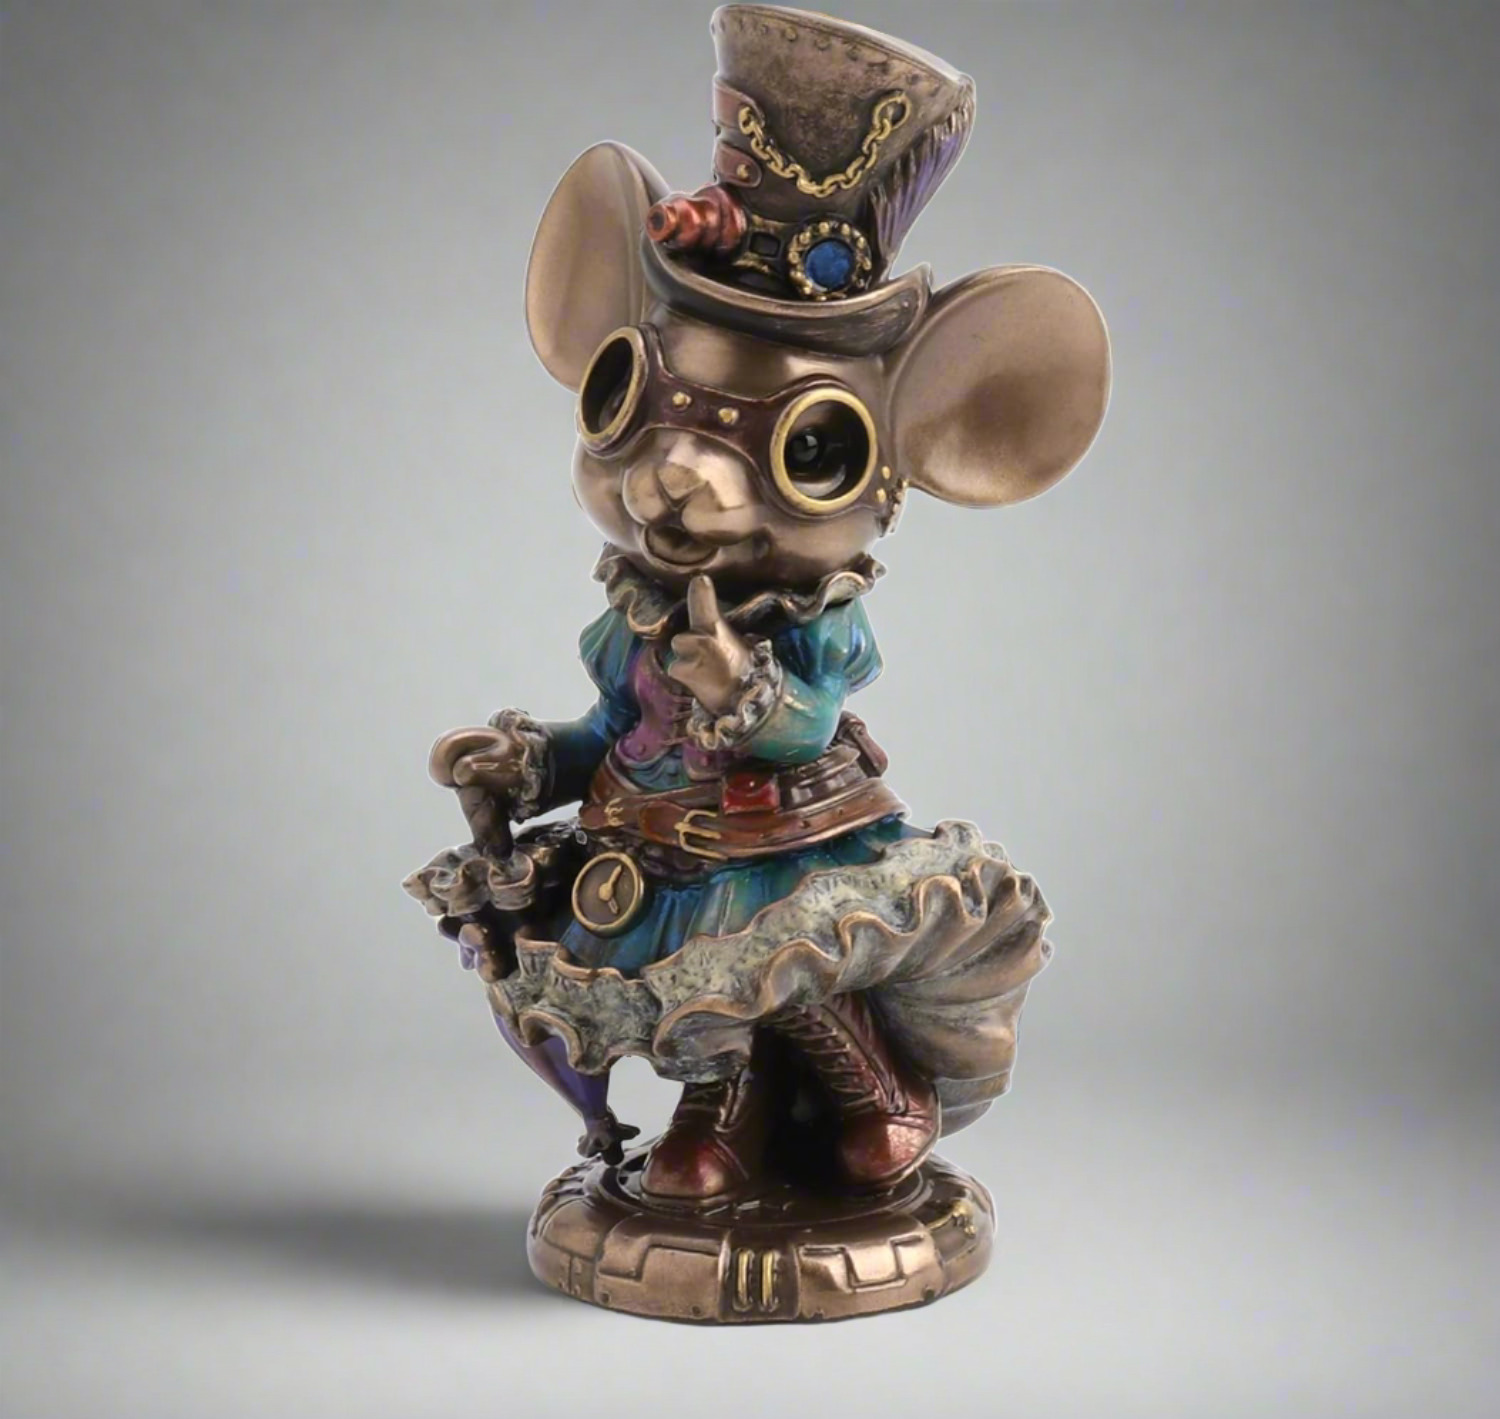 Victorian Steampunk Mouse Statue - Lady Mouse with Parasol, Detailed Decor